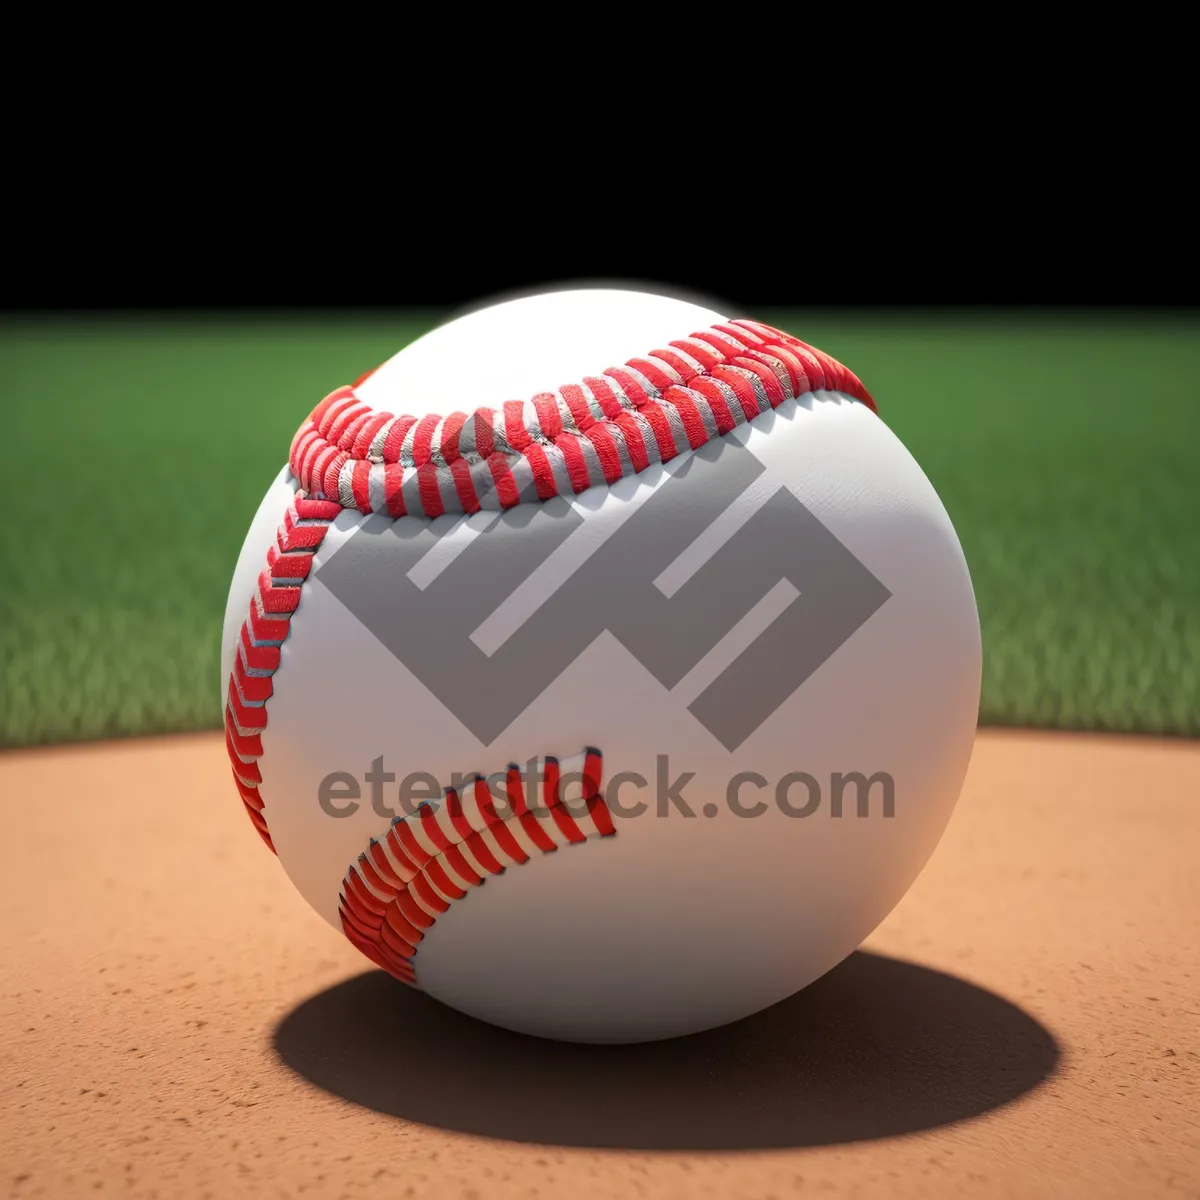 Picture of Baseball leather glove on grass: Play ball!